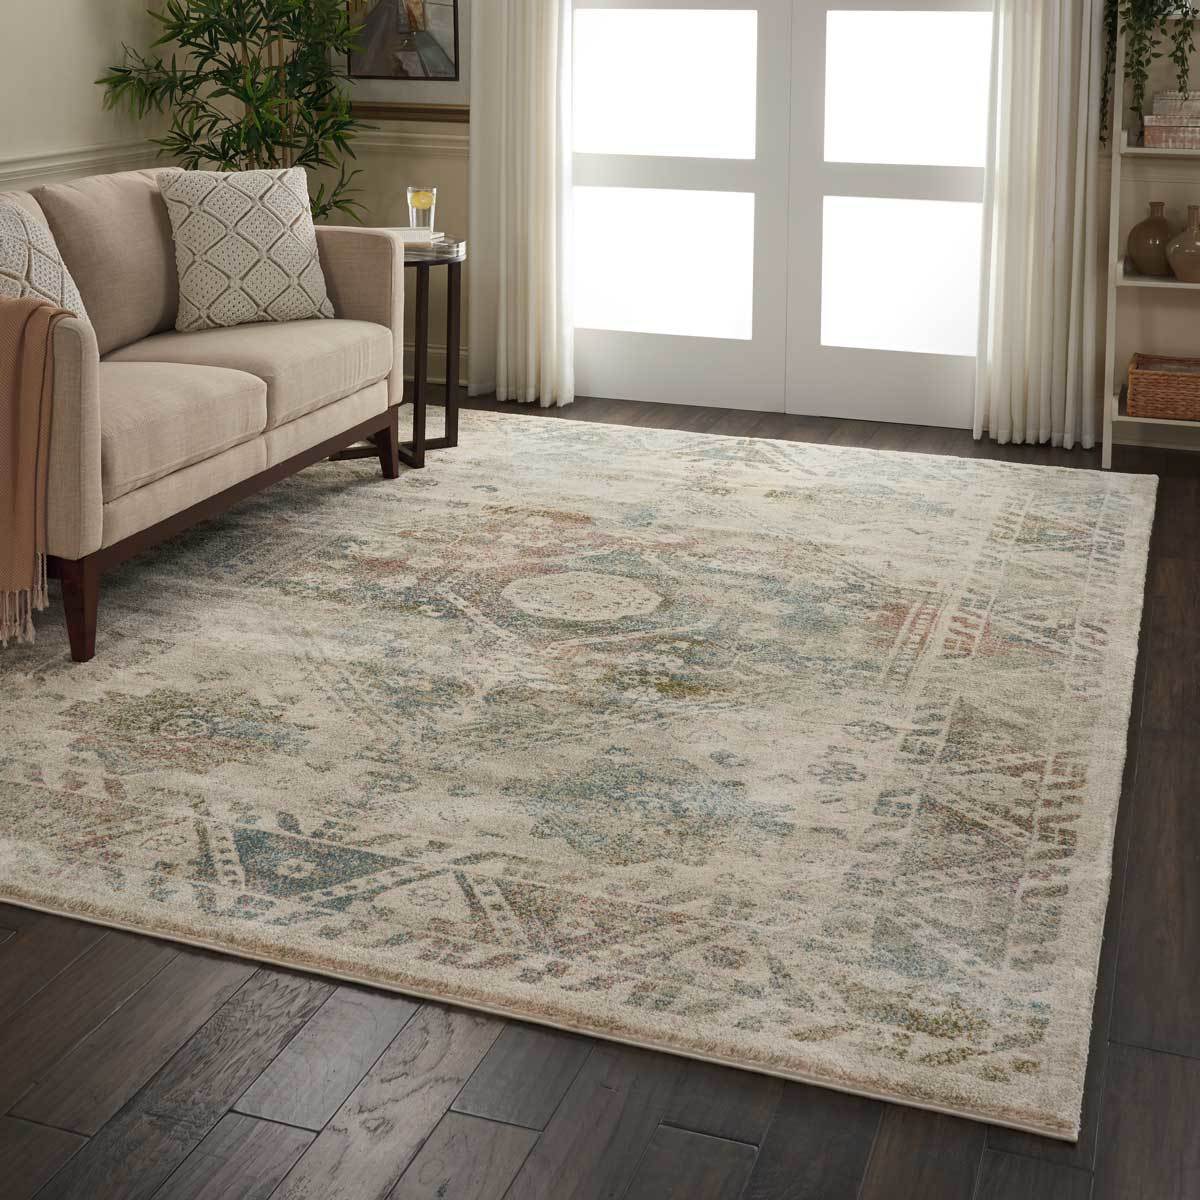 Fusion Distressed Persian Influenced Rug in 2 Sizes